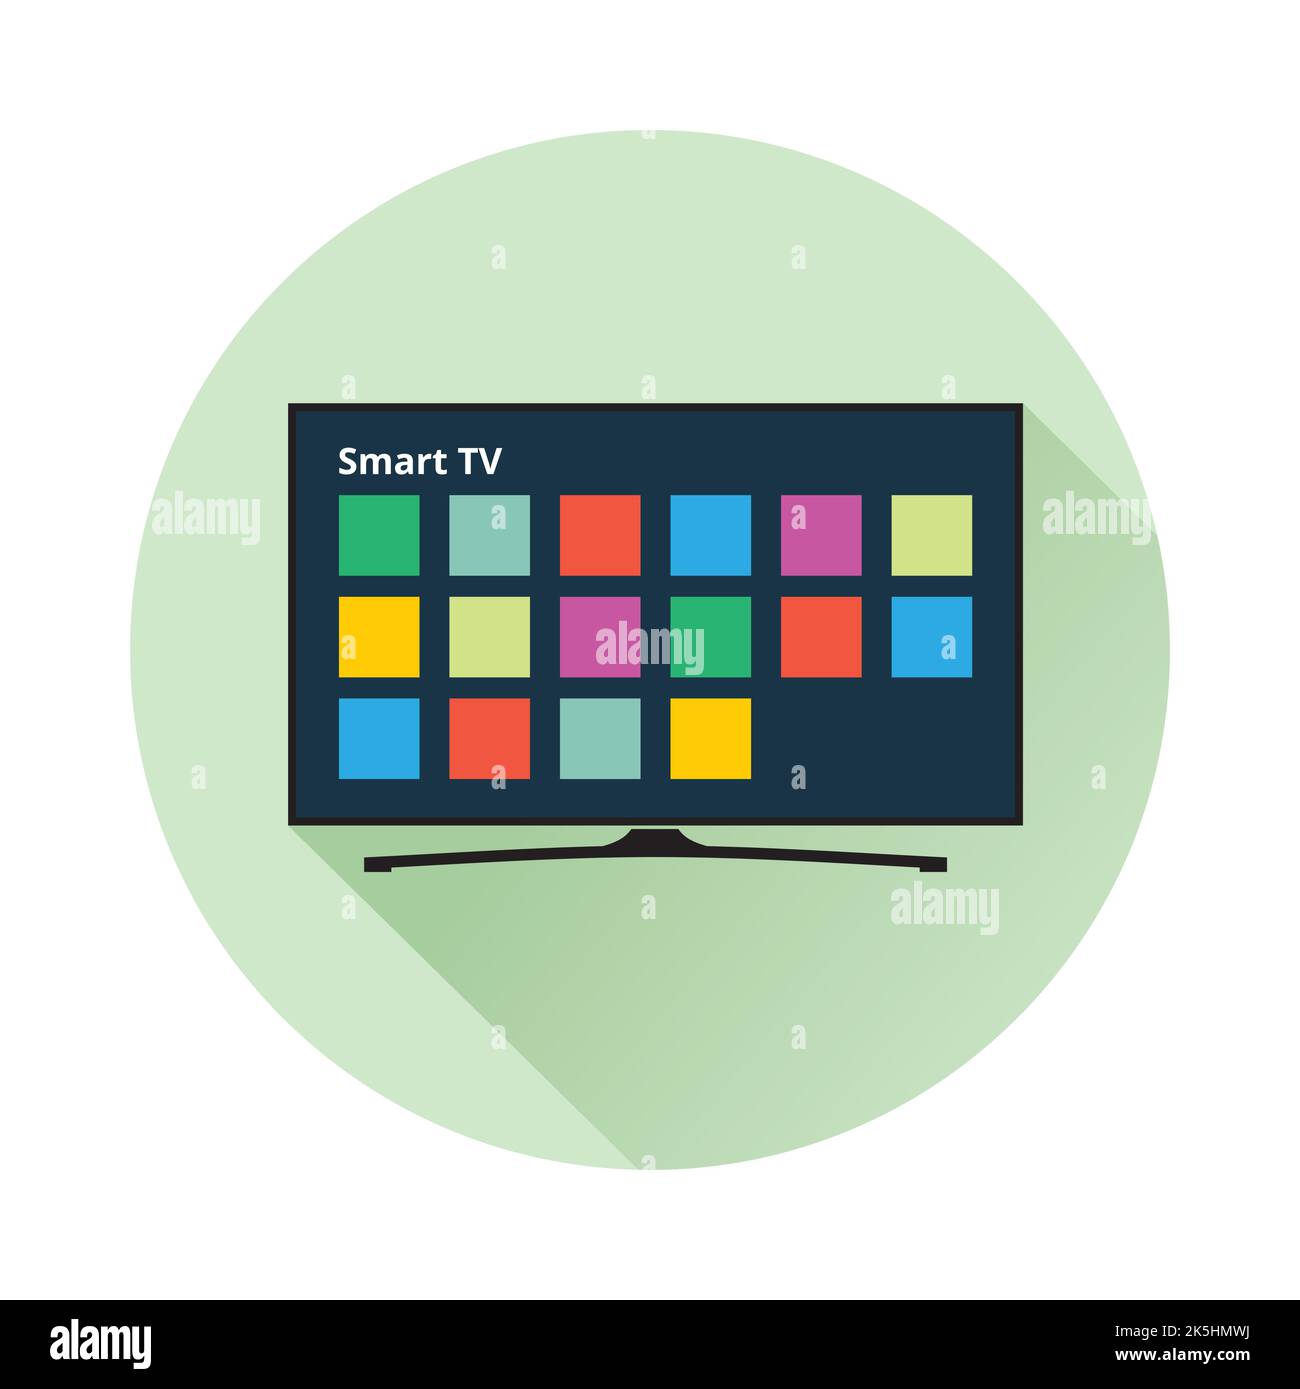 Smart TV icon in flat style. LED TV with colorful application buttons on display. Vector eps8 illustration. Stock Vector